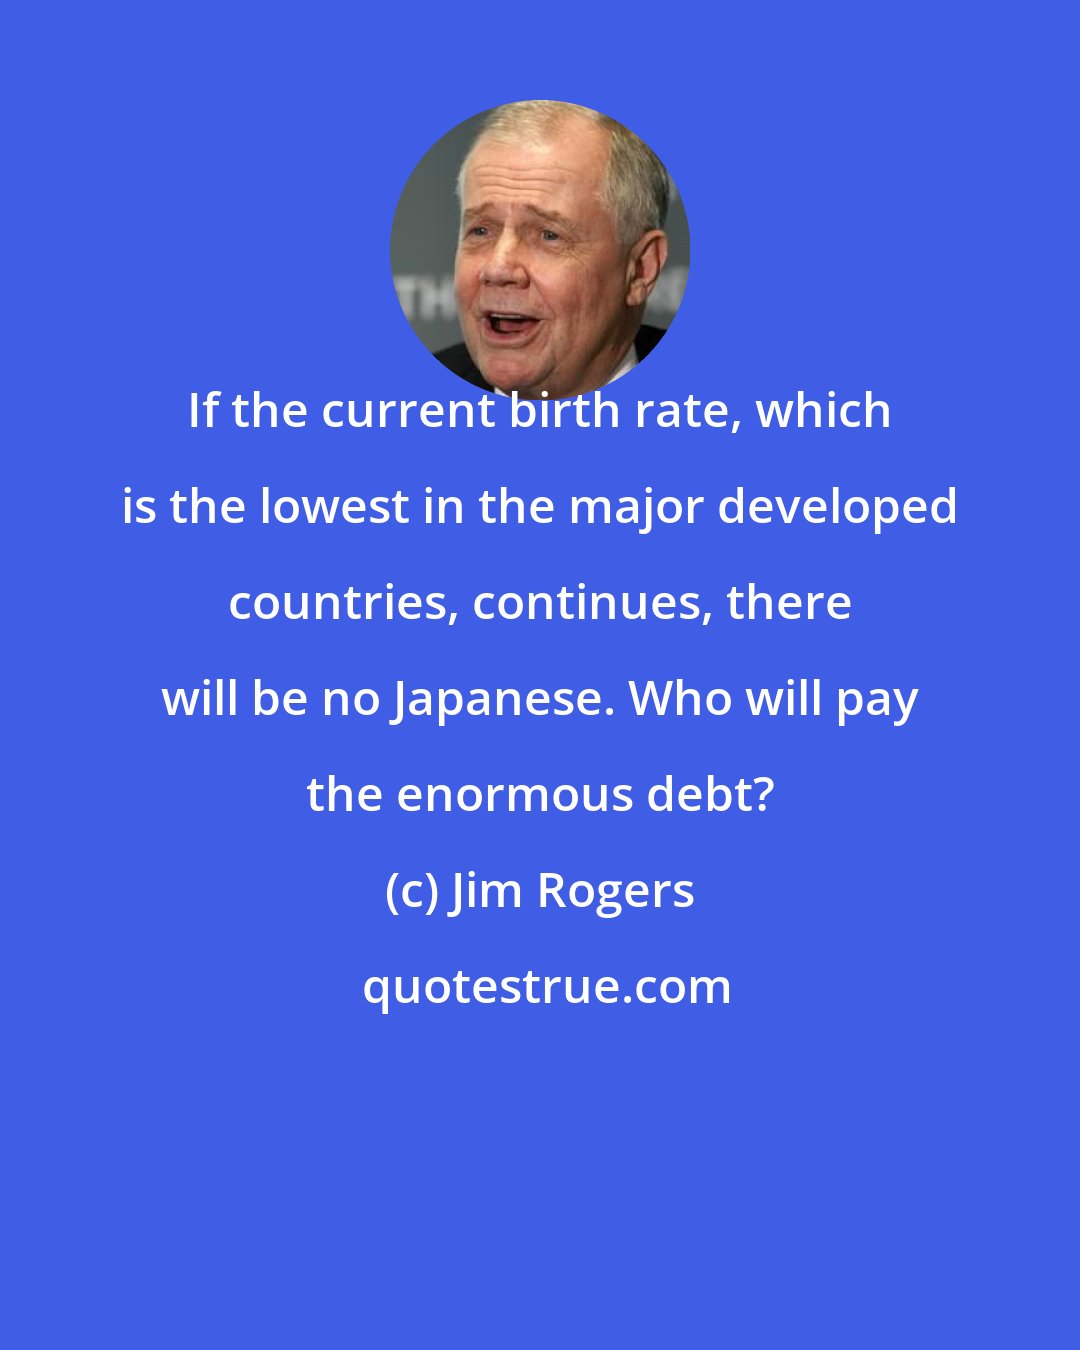 Jim Rogers: If the current birth rate, which is the lowest in the major developed countries, continues, there will be no Japanese. Who will pay the enormous debt?